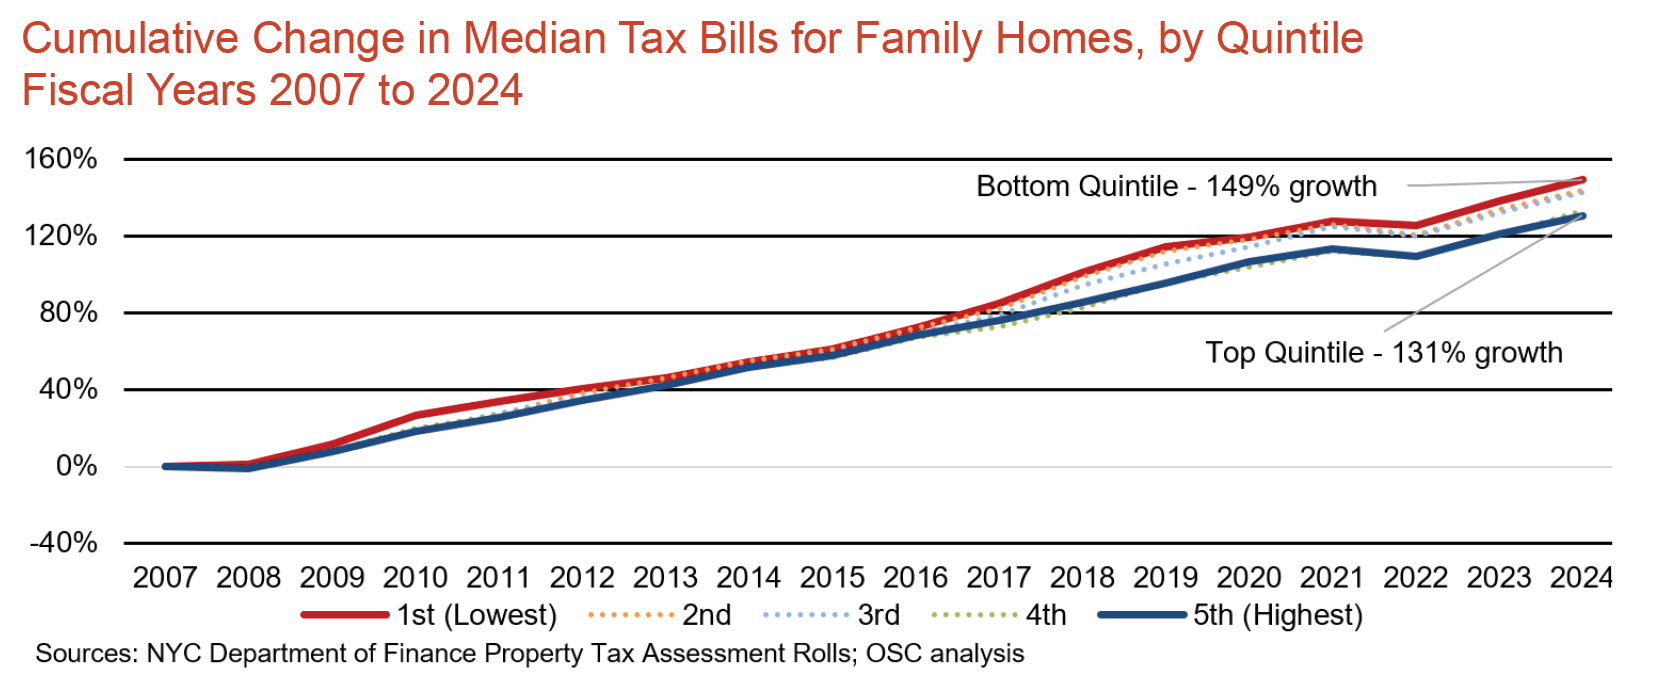 Cumulative Change in Median Tax Bills for Family Homes, by Quintile Fiscal Years 2007 to 2024